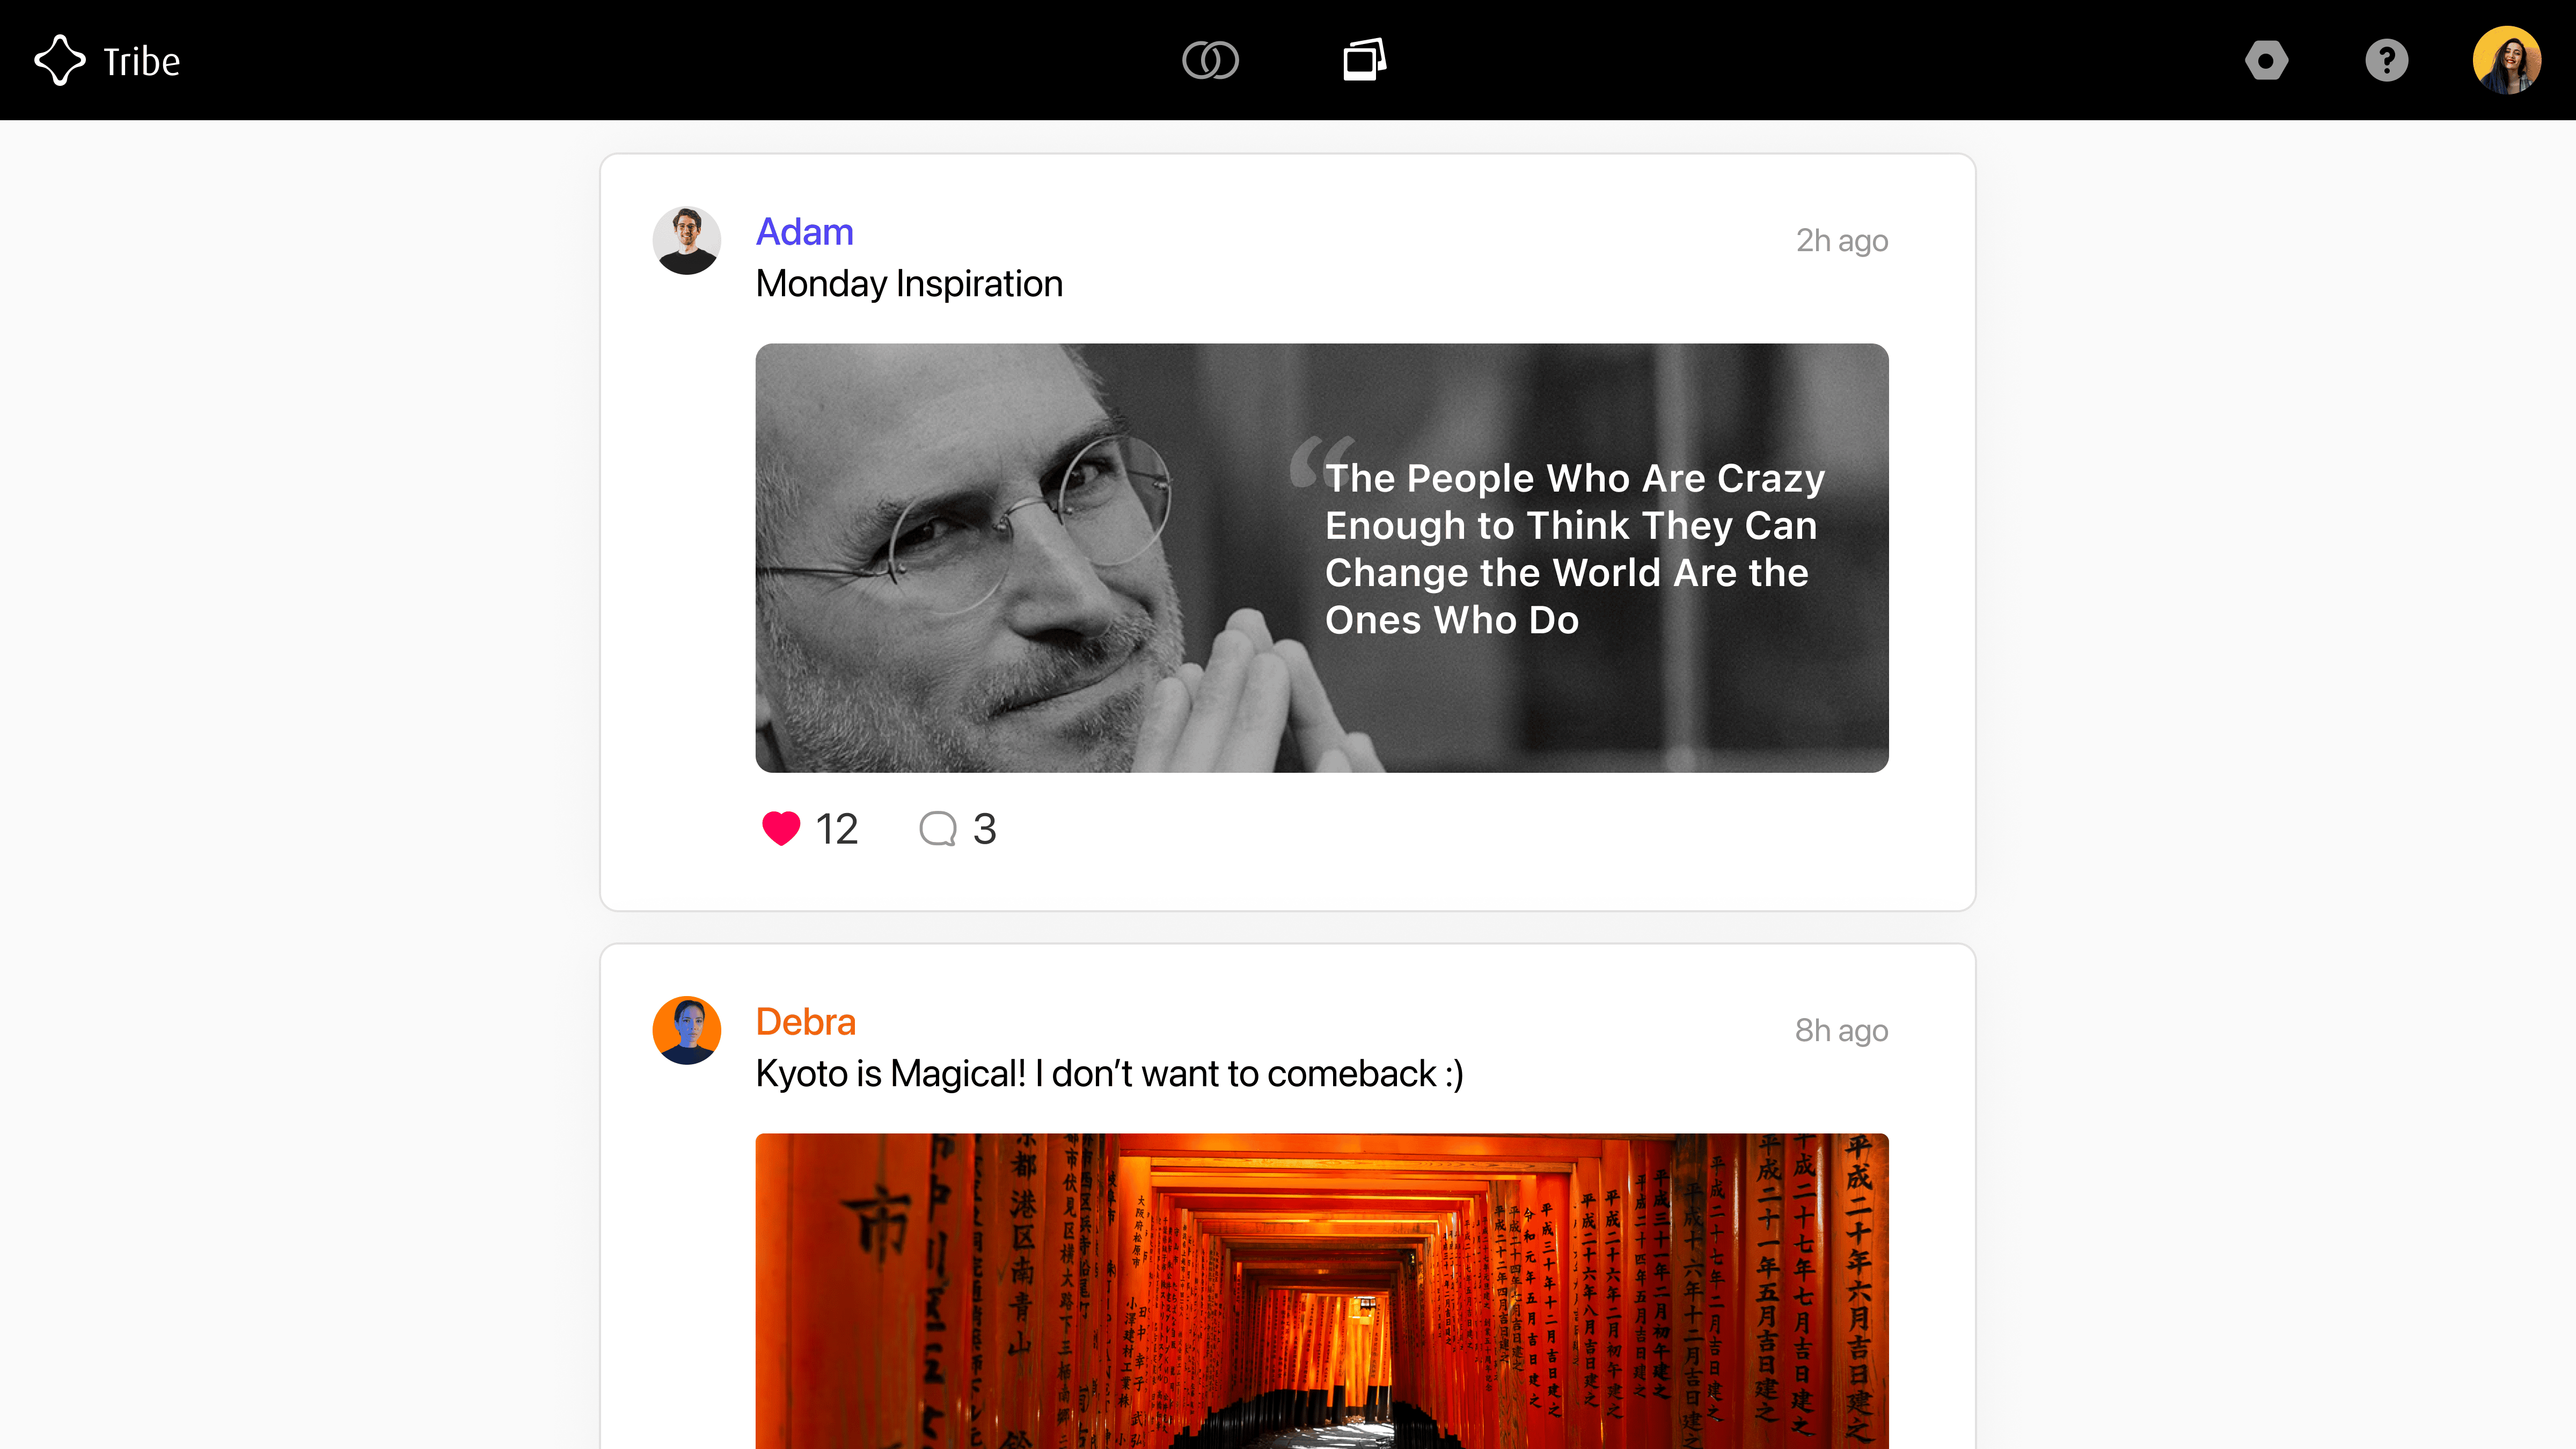 Tribe's Stories tab shows Adam's post with a monochrome image of Steve Jobs accompanied by an inspirational quote, and below is Debra's post with a caption praising Kyoto, partially displaying a vibrant photo of the red Torii gates.